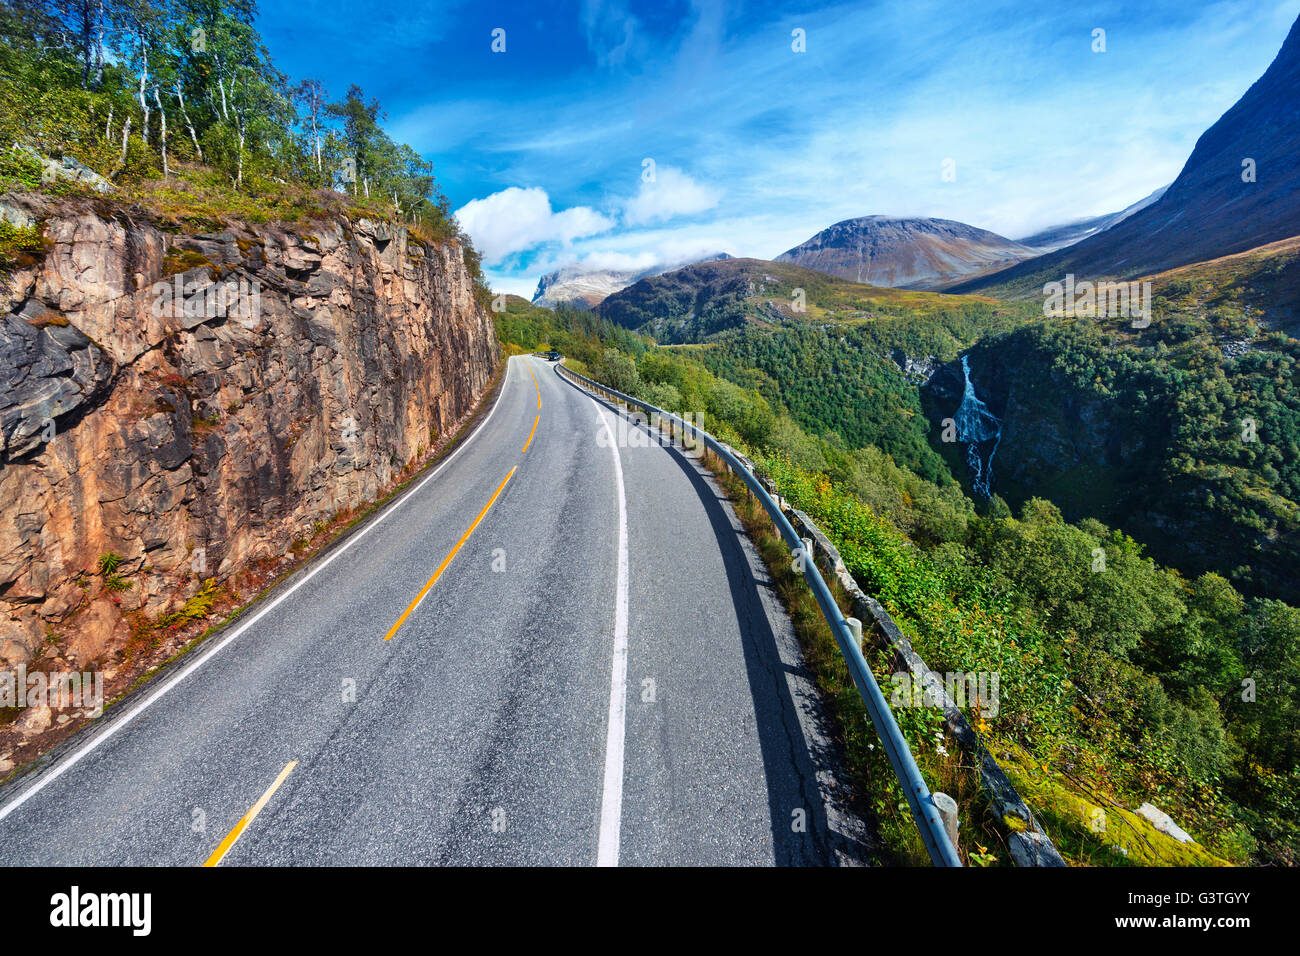 Norway, More og Romsdal, Sunnmore, View of road in mountainous landscape Stock Photo